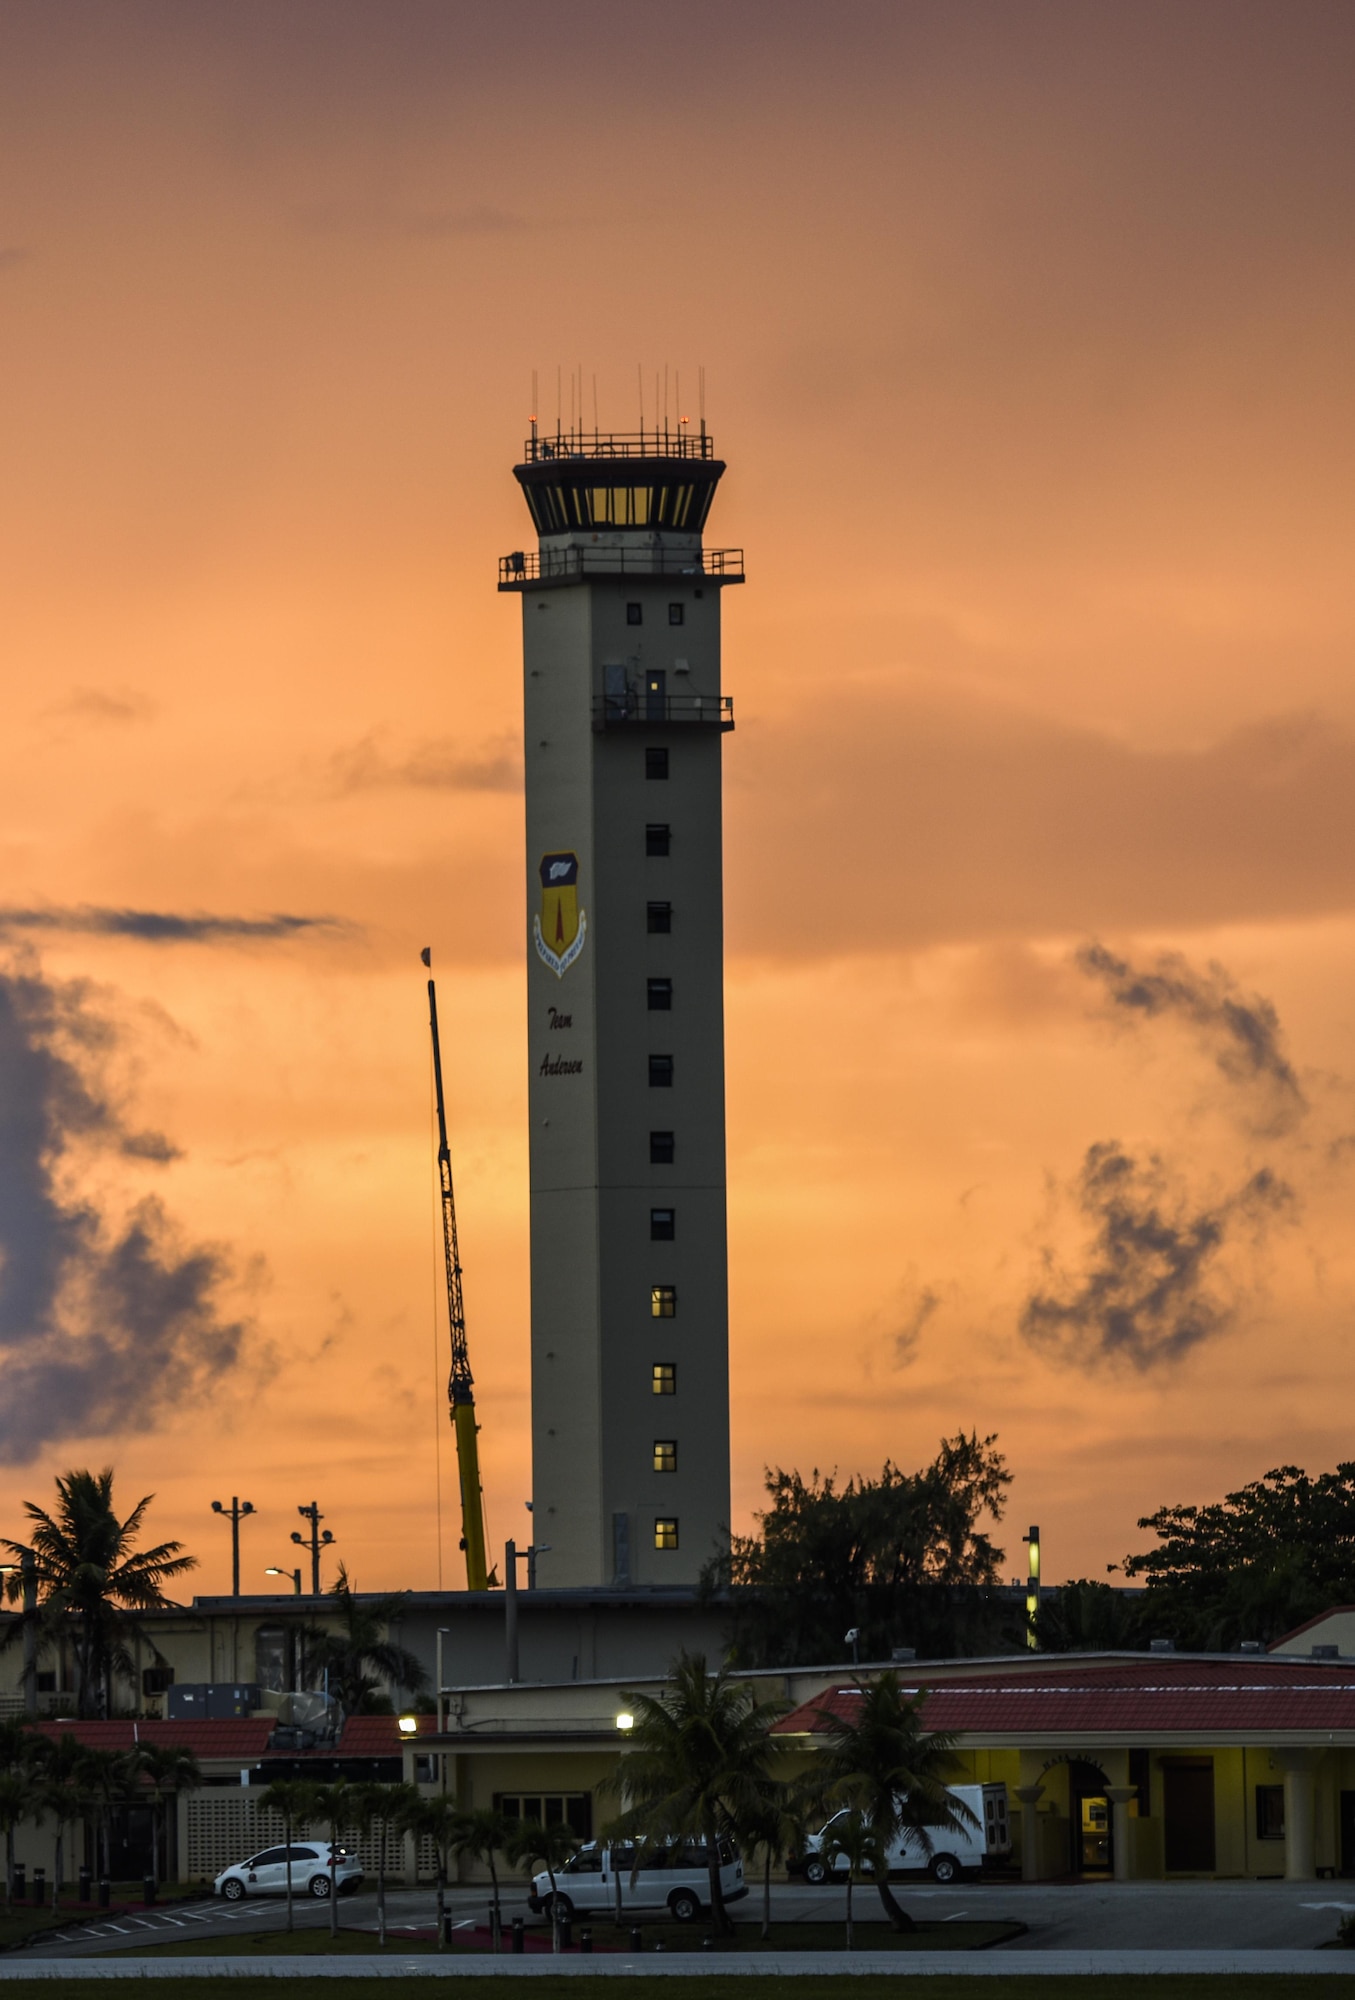 The Andersen control tower under goes renovations June 20, 2017, at Andersen Air Force Base, Guam. Air traffic control Airmen assigned to the 36th Operation Support Squadron began work in the new tower June 30 after spending almost three months working in the mobile tower unit on the flightline. (U.S. Air Force Photo by Tech Sgt. Richard P. Ebensberger)